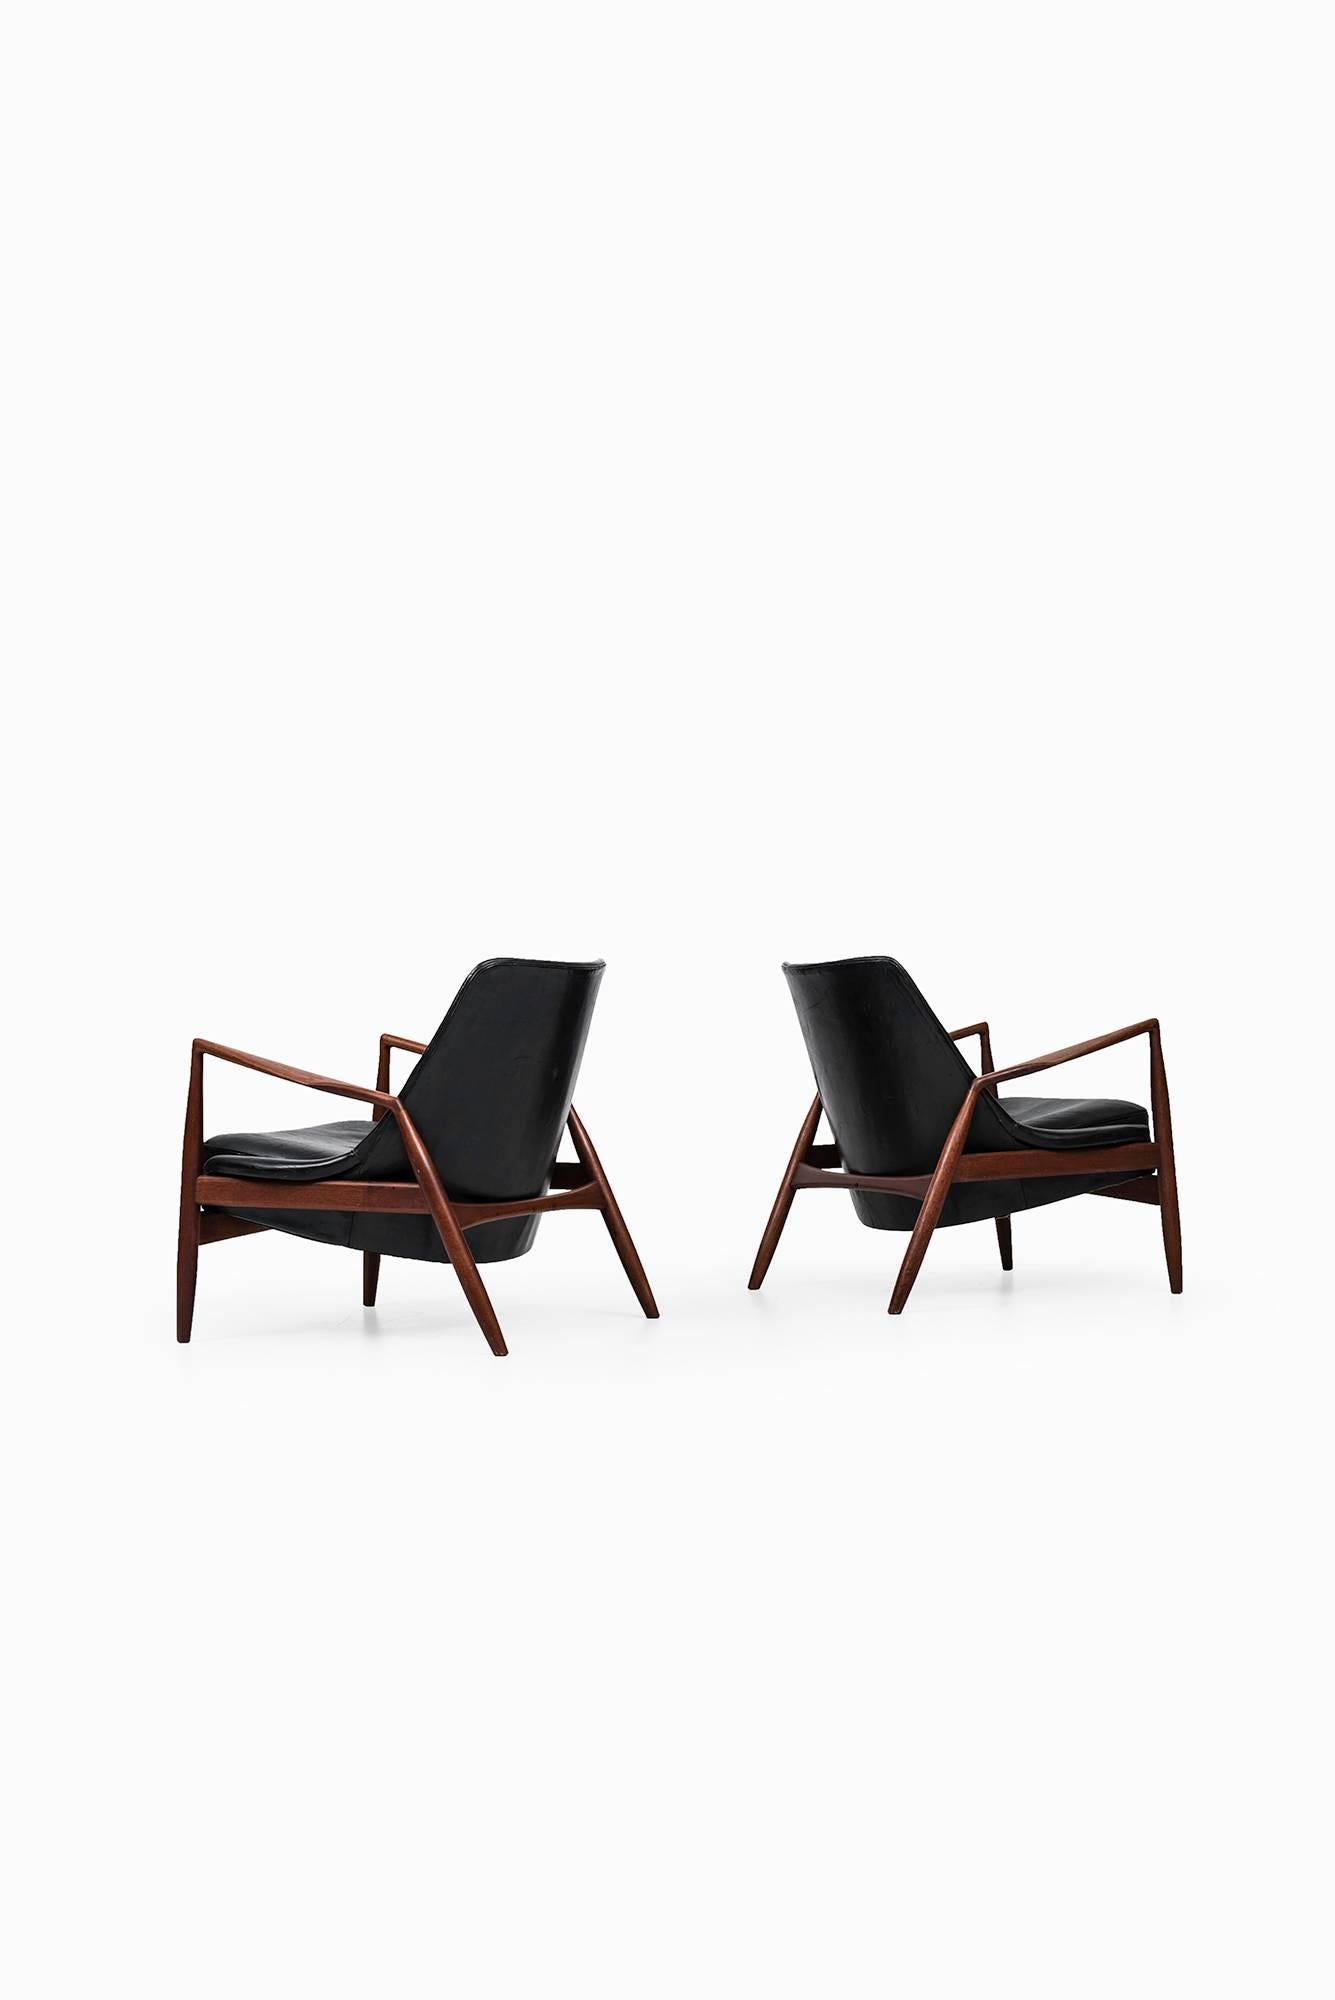 Mid-20th Century Ib Kofod-Larsen Seal Easy Chairs by OPE in Sweden